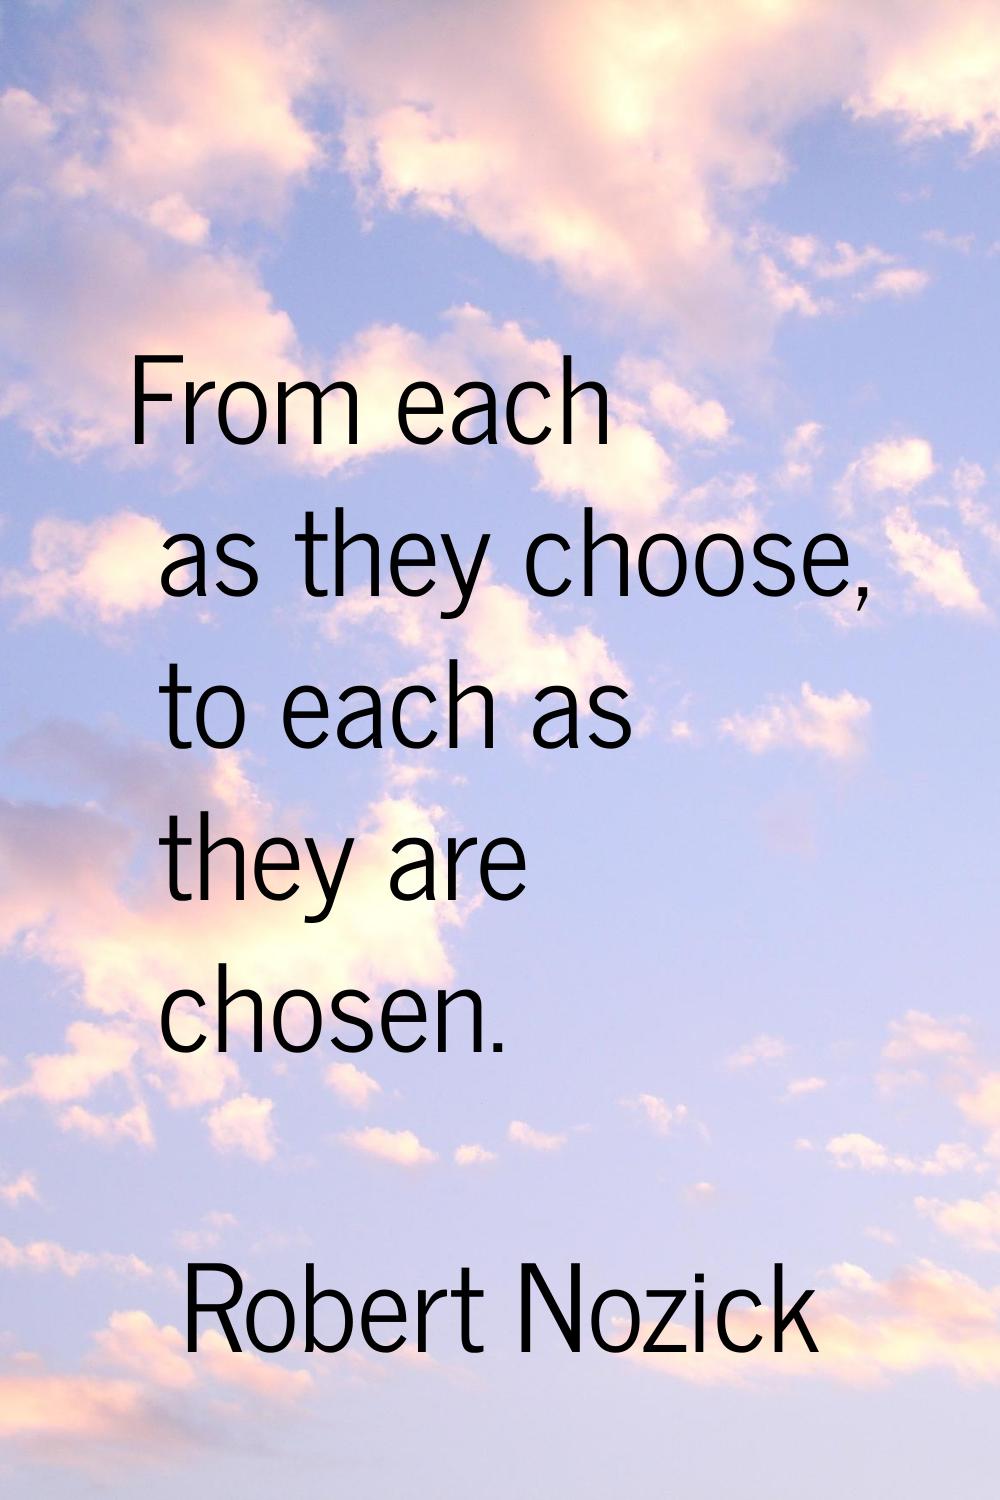 From each as they choose, to each as they are chosen.